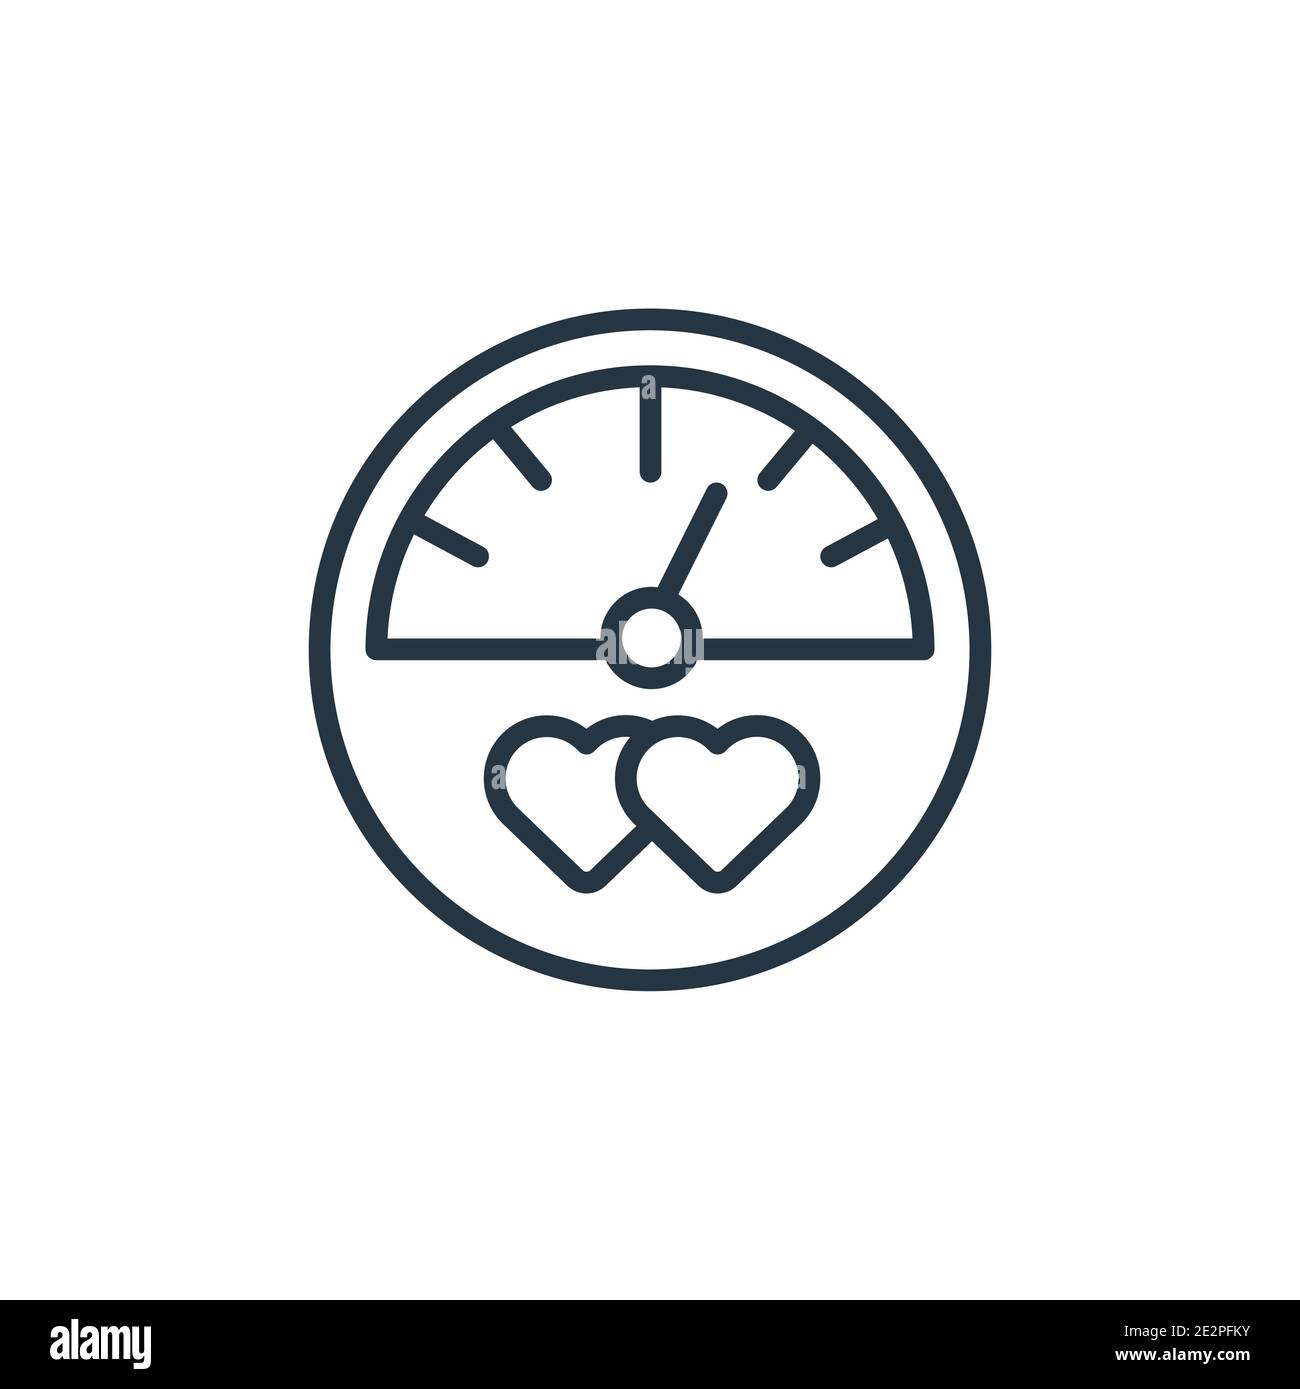 Digital barometer icon outline style Royalty Free Vector